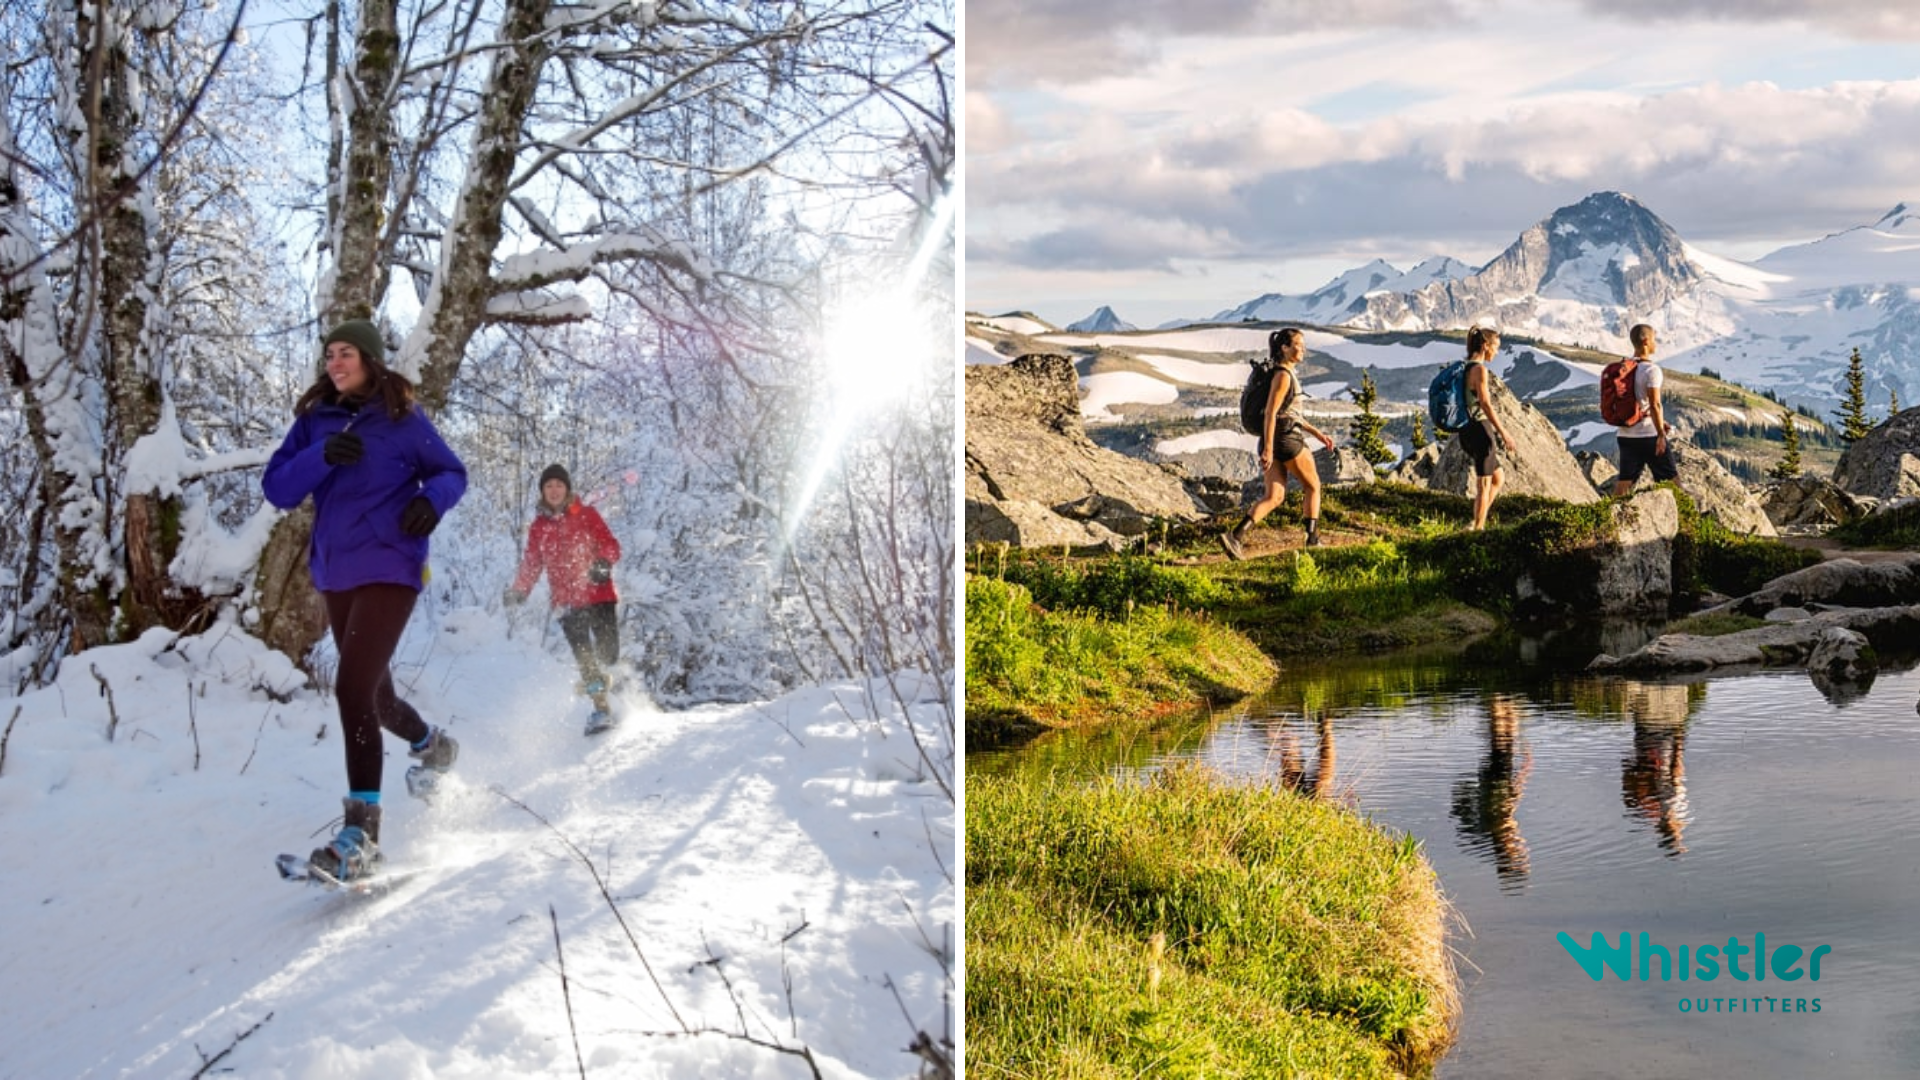 Winter or Summer? Which is the best time to hike?